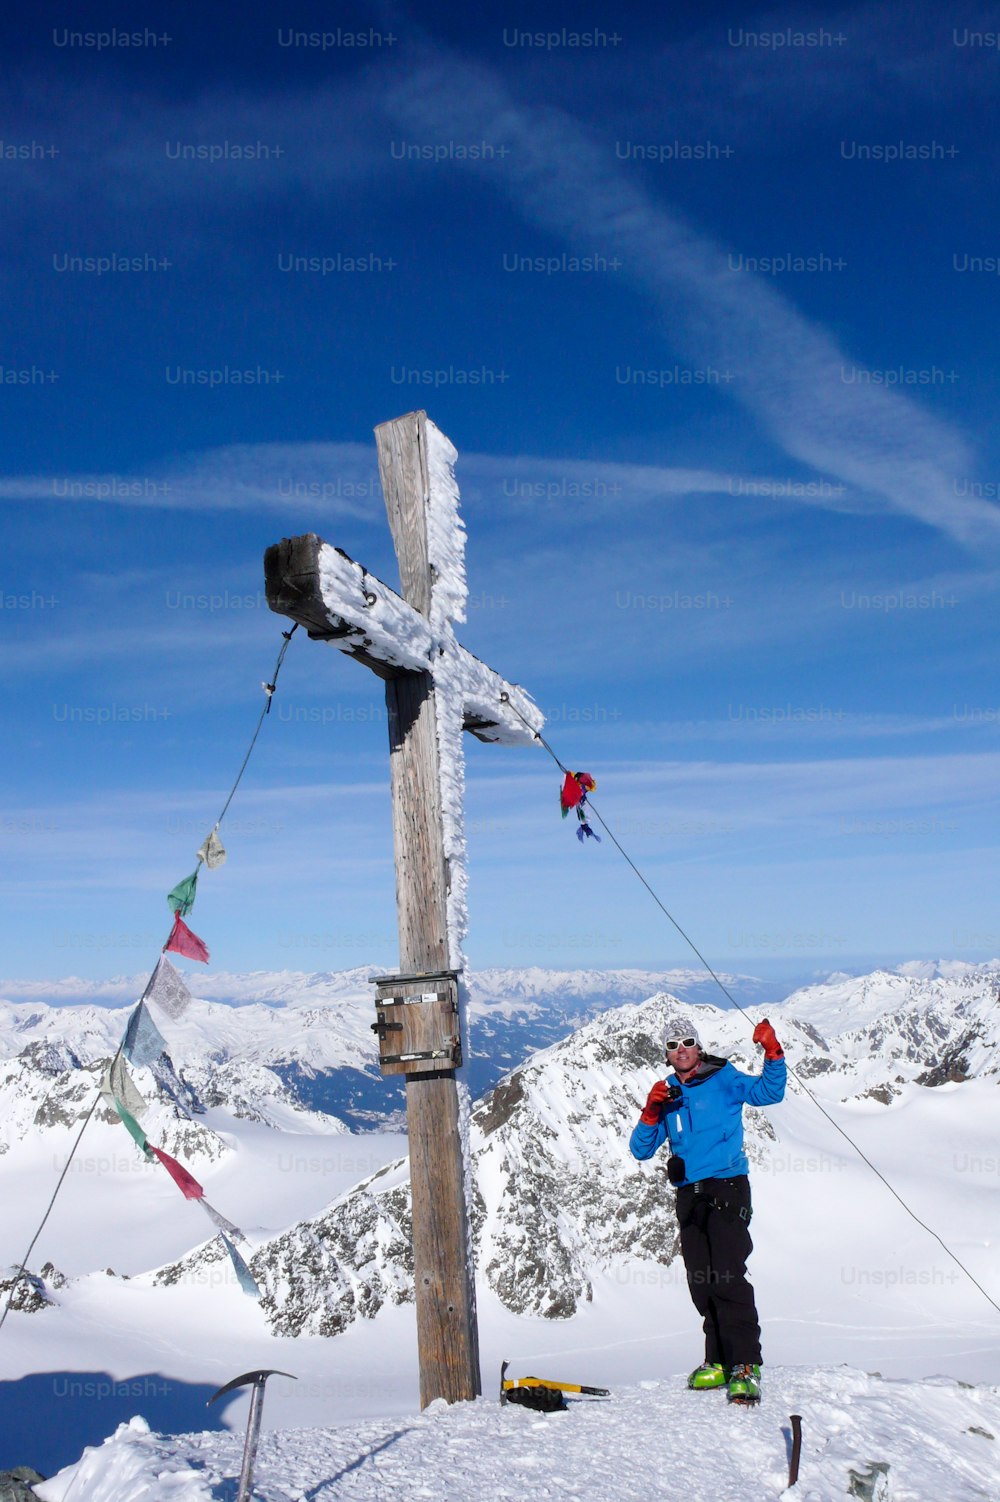 A male backcountry skier at the summit cross of a high alpine peak on a beautiful winter day